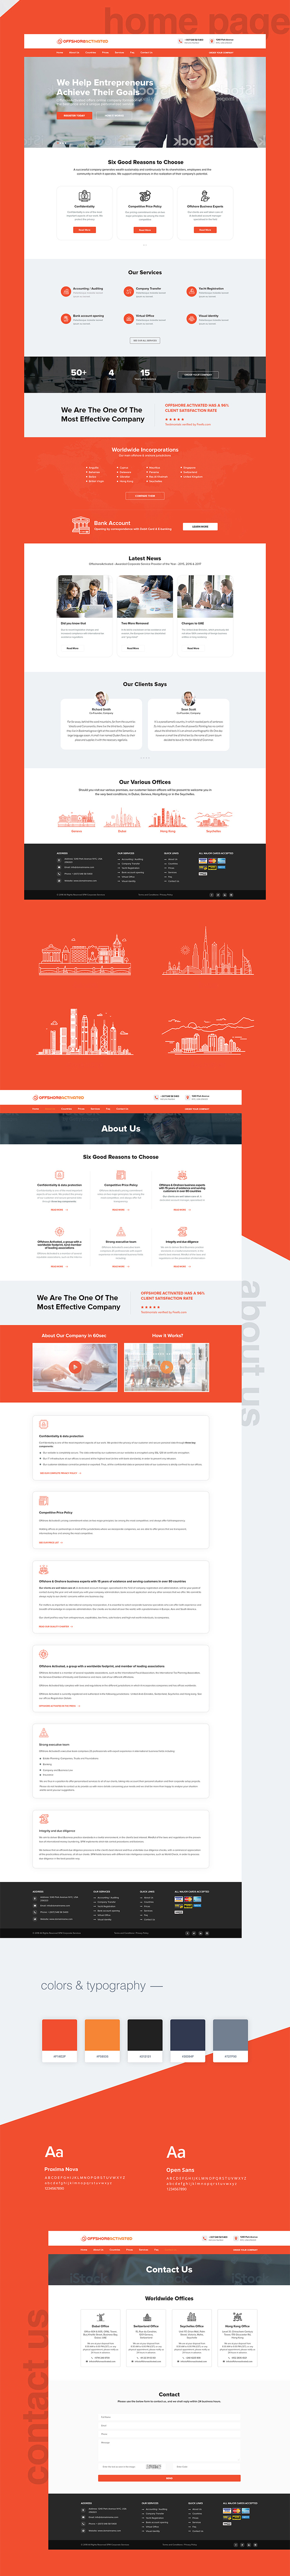 Creative Offshore Activated Web Design